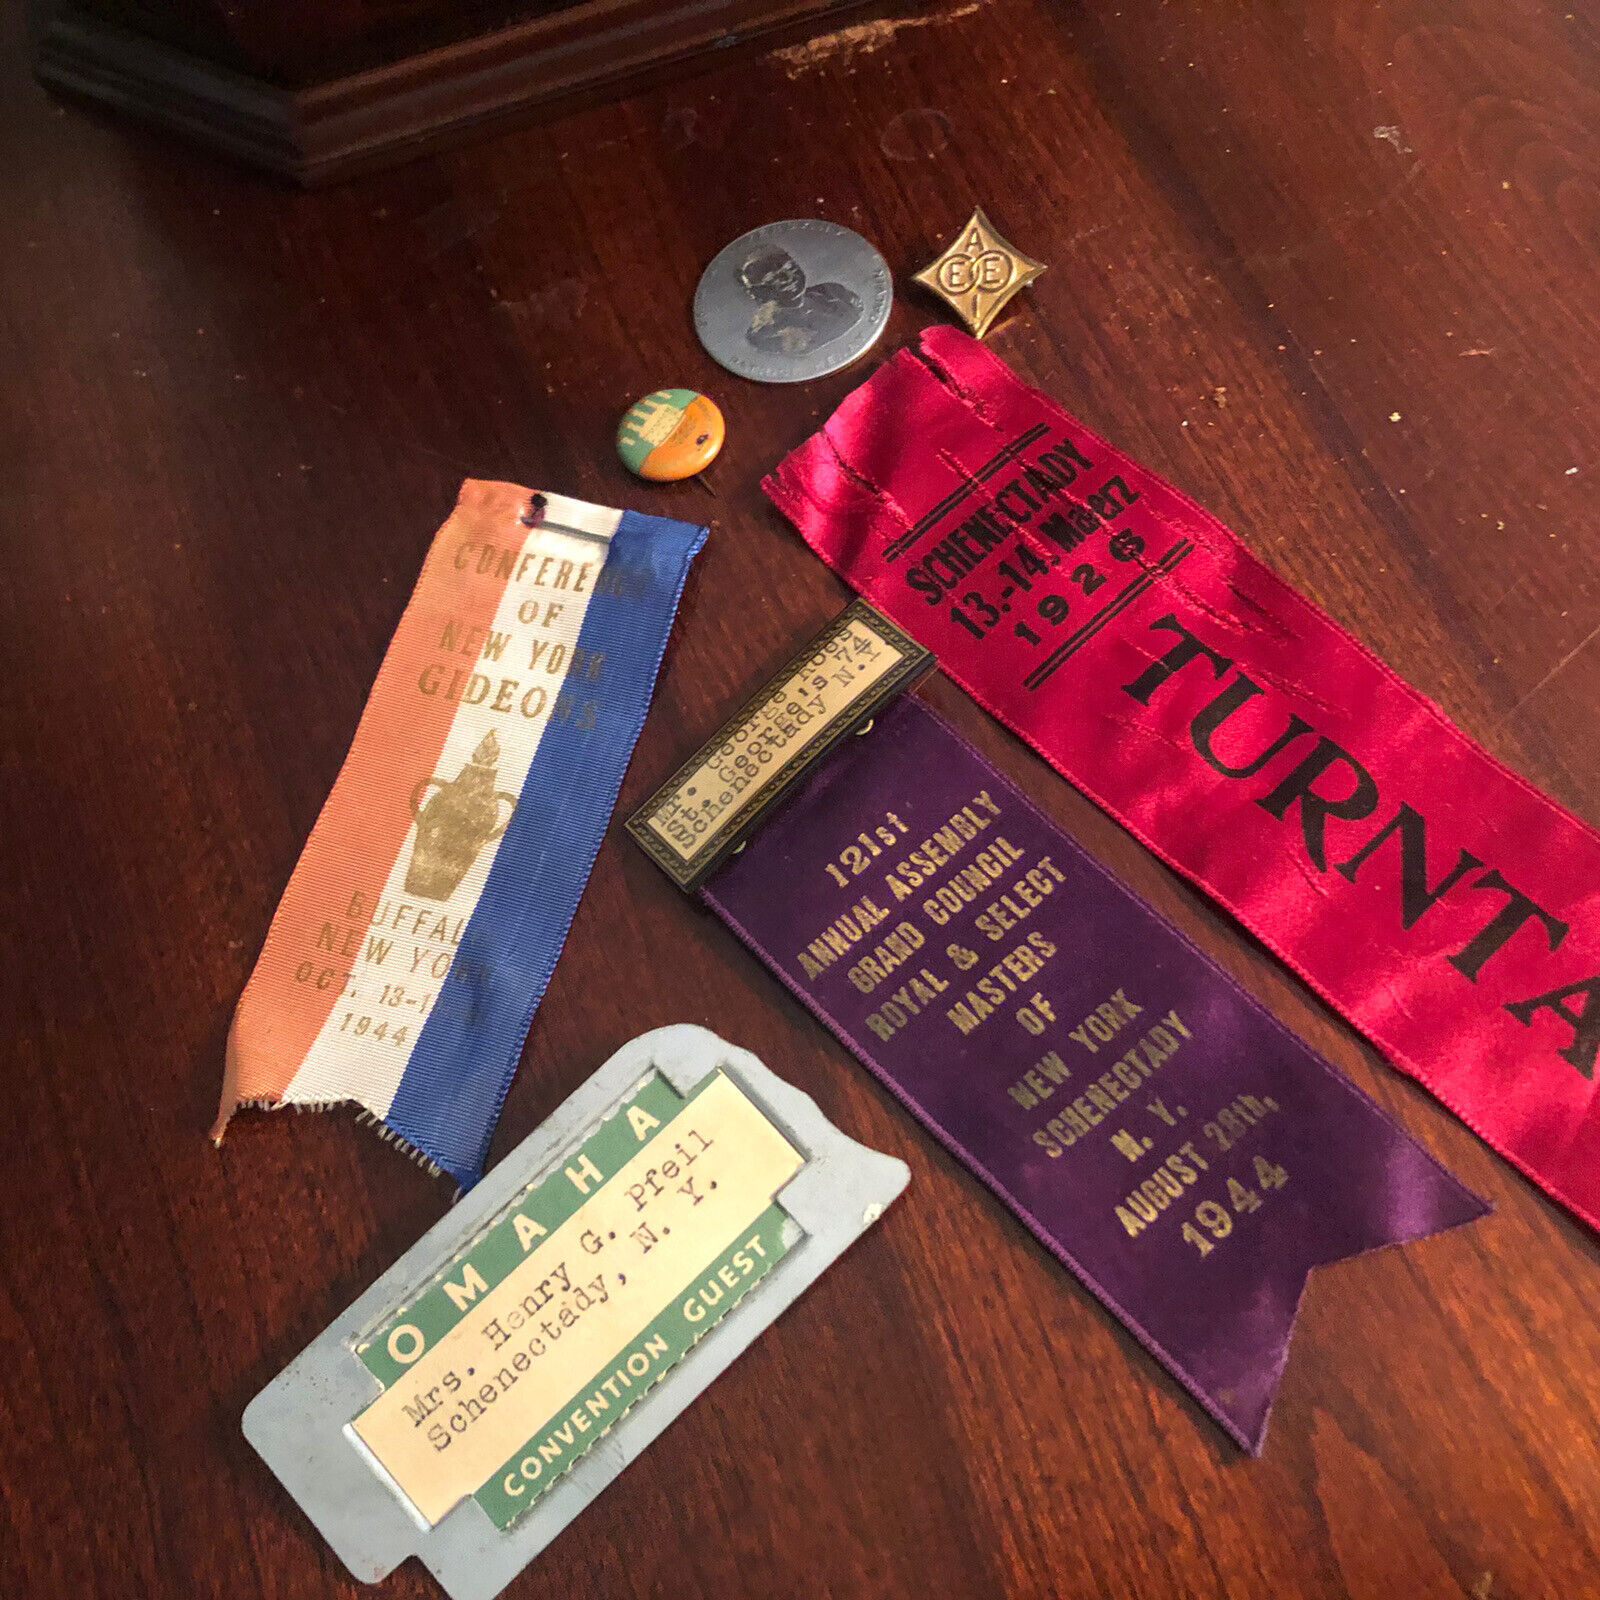 1920’s 40’s New York, Schenectady - Buffalo Delegate Pins & Ribbons Gideon’s